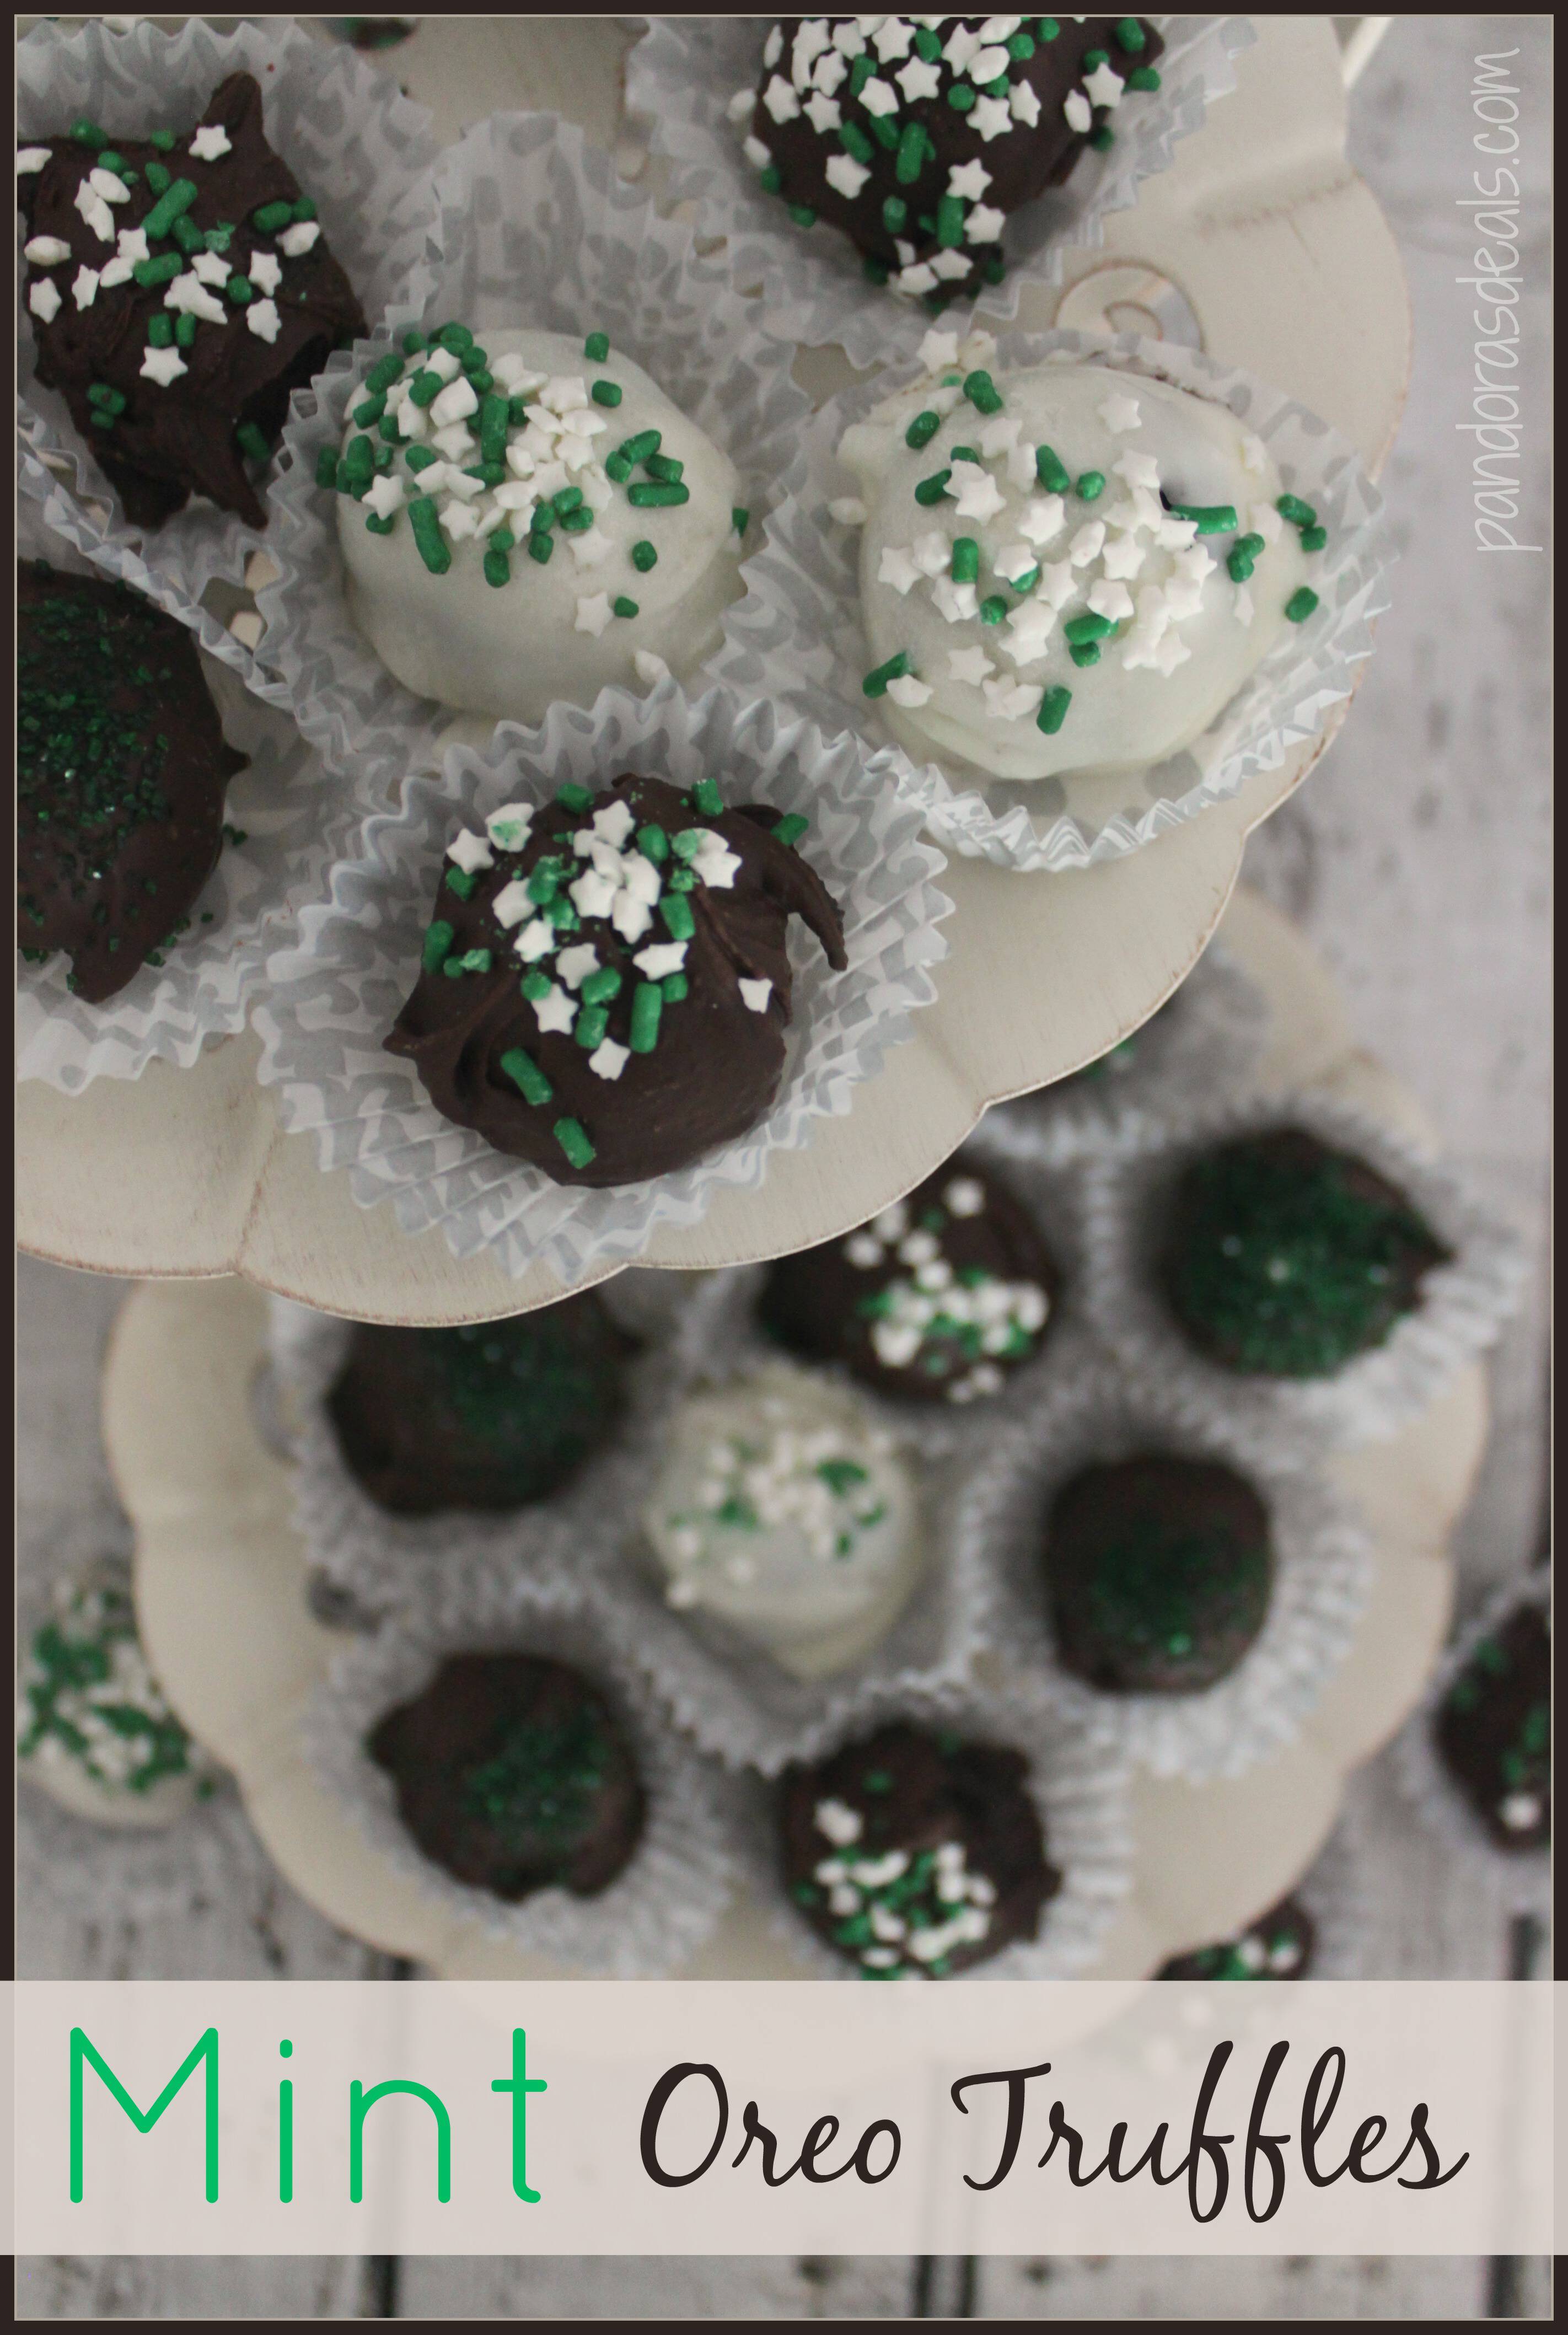 This Mint Oreo Truffles Recipe is so simple to make with just a few ingredients. And they're amazingly delicious! A perfect easy dessert recipe for St. Patrick's Day..or any day!